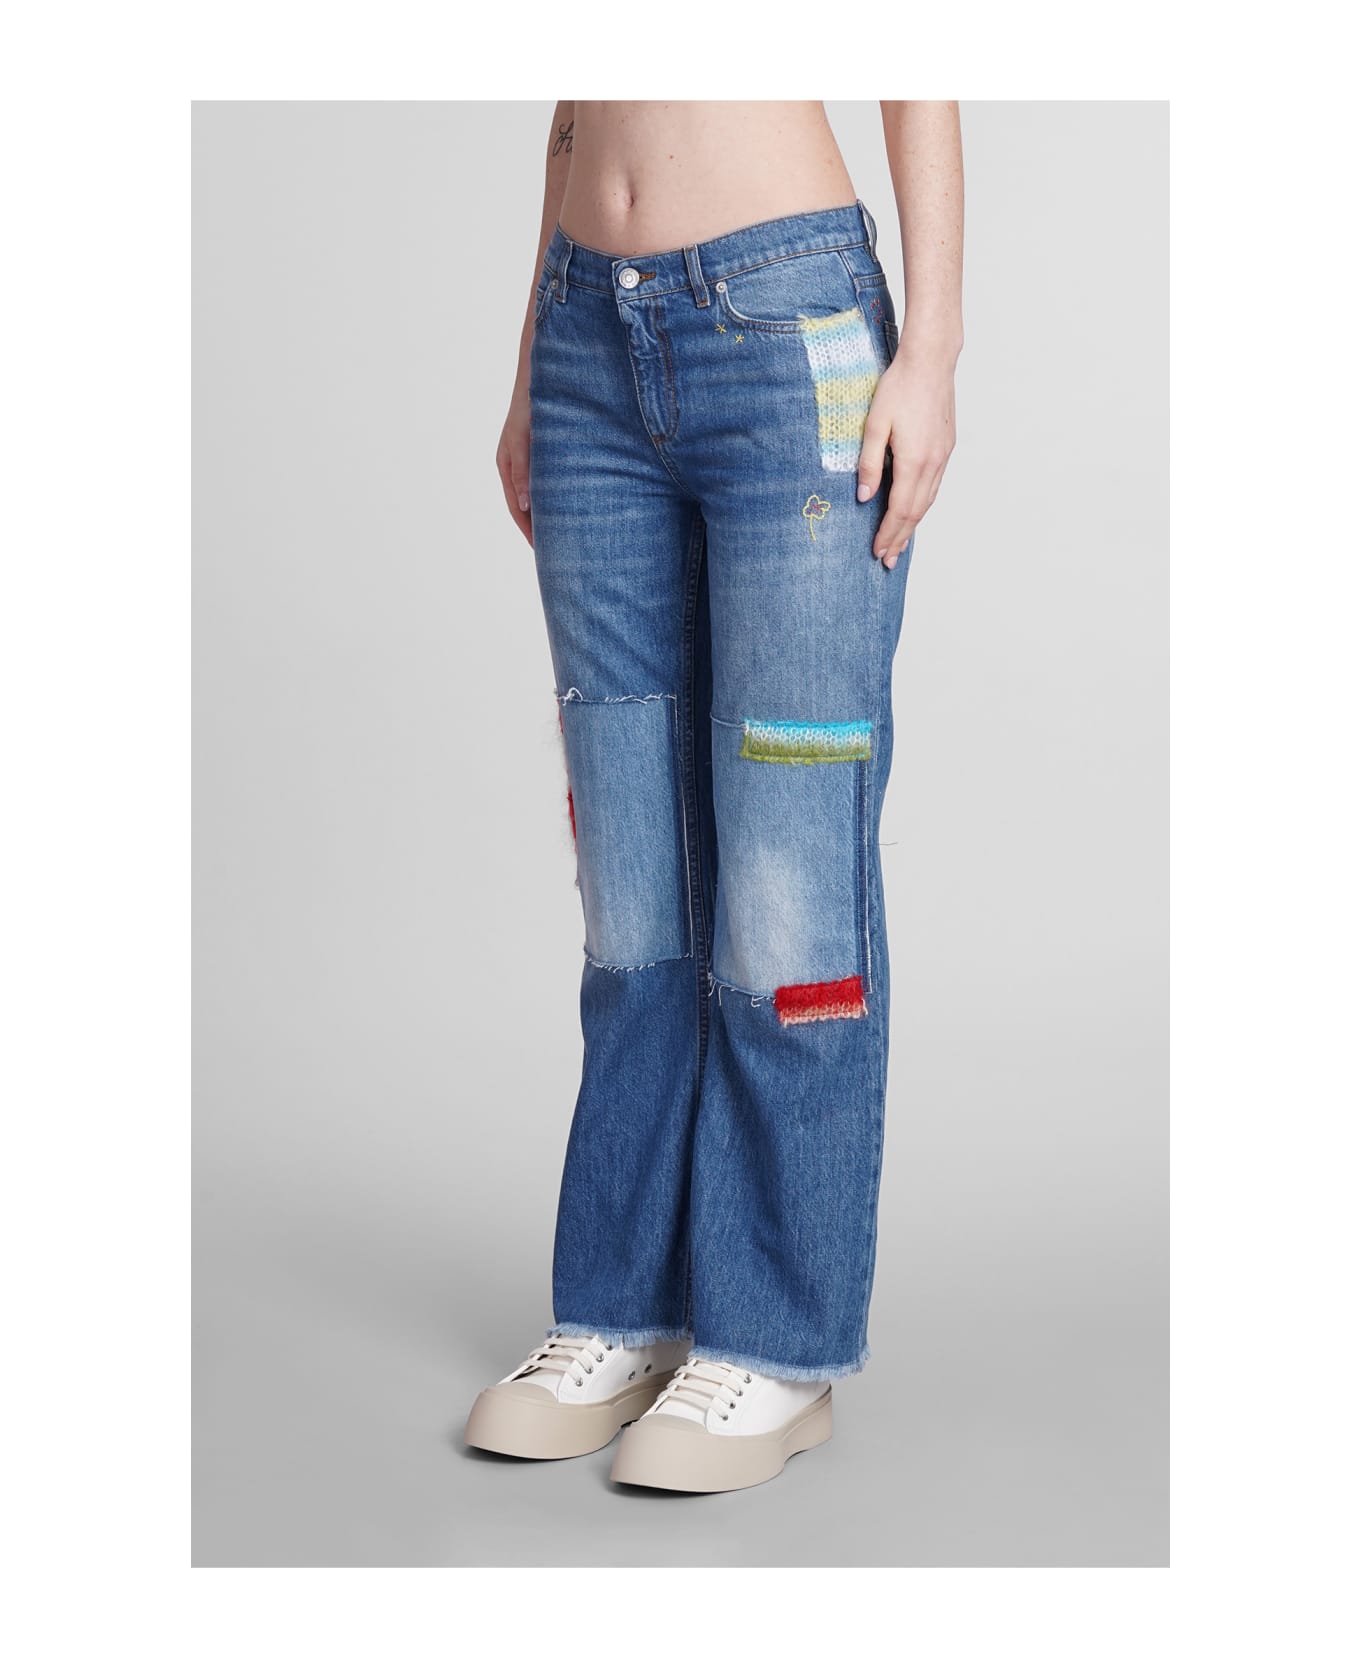 Marni Jeans In Blue Cotton - BLUE MIX デニム